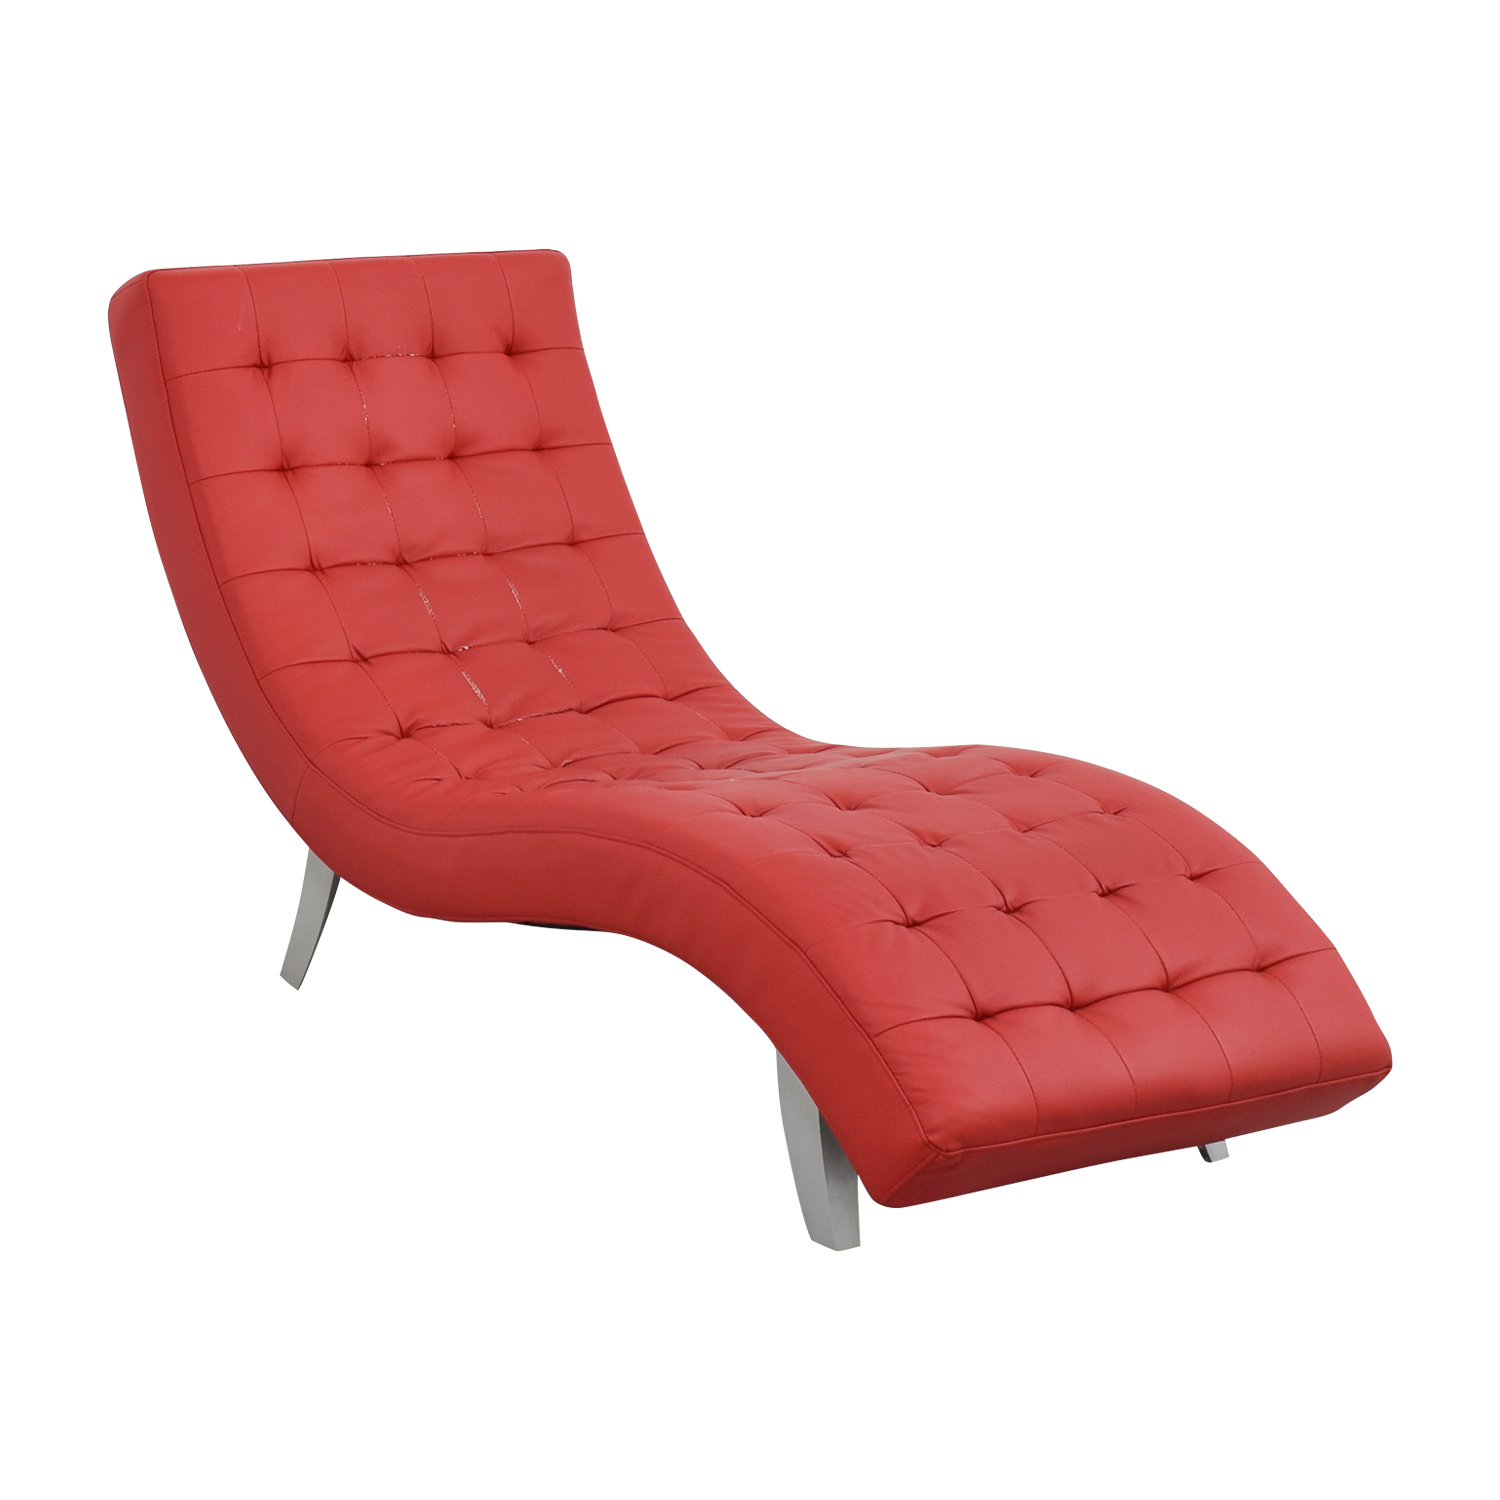 Red Chaise Lounge photo - 9